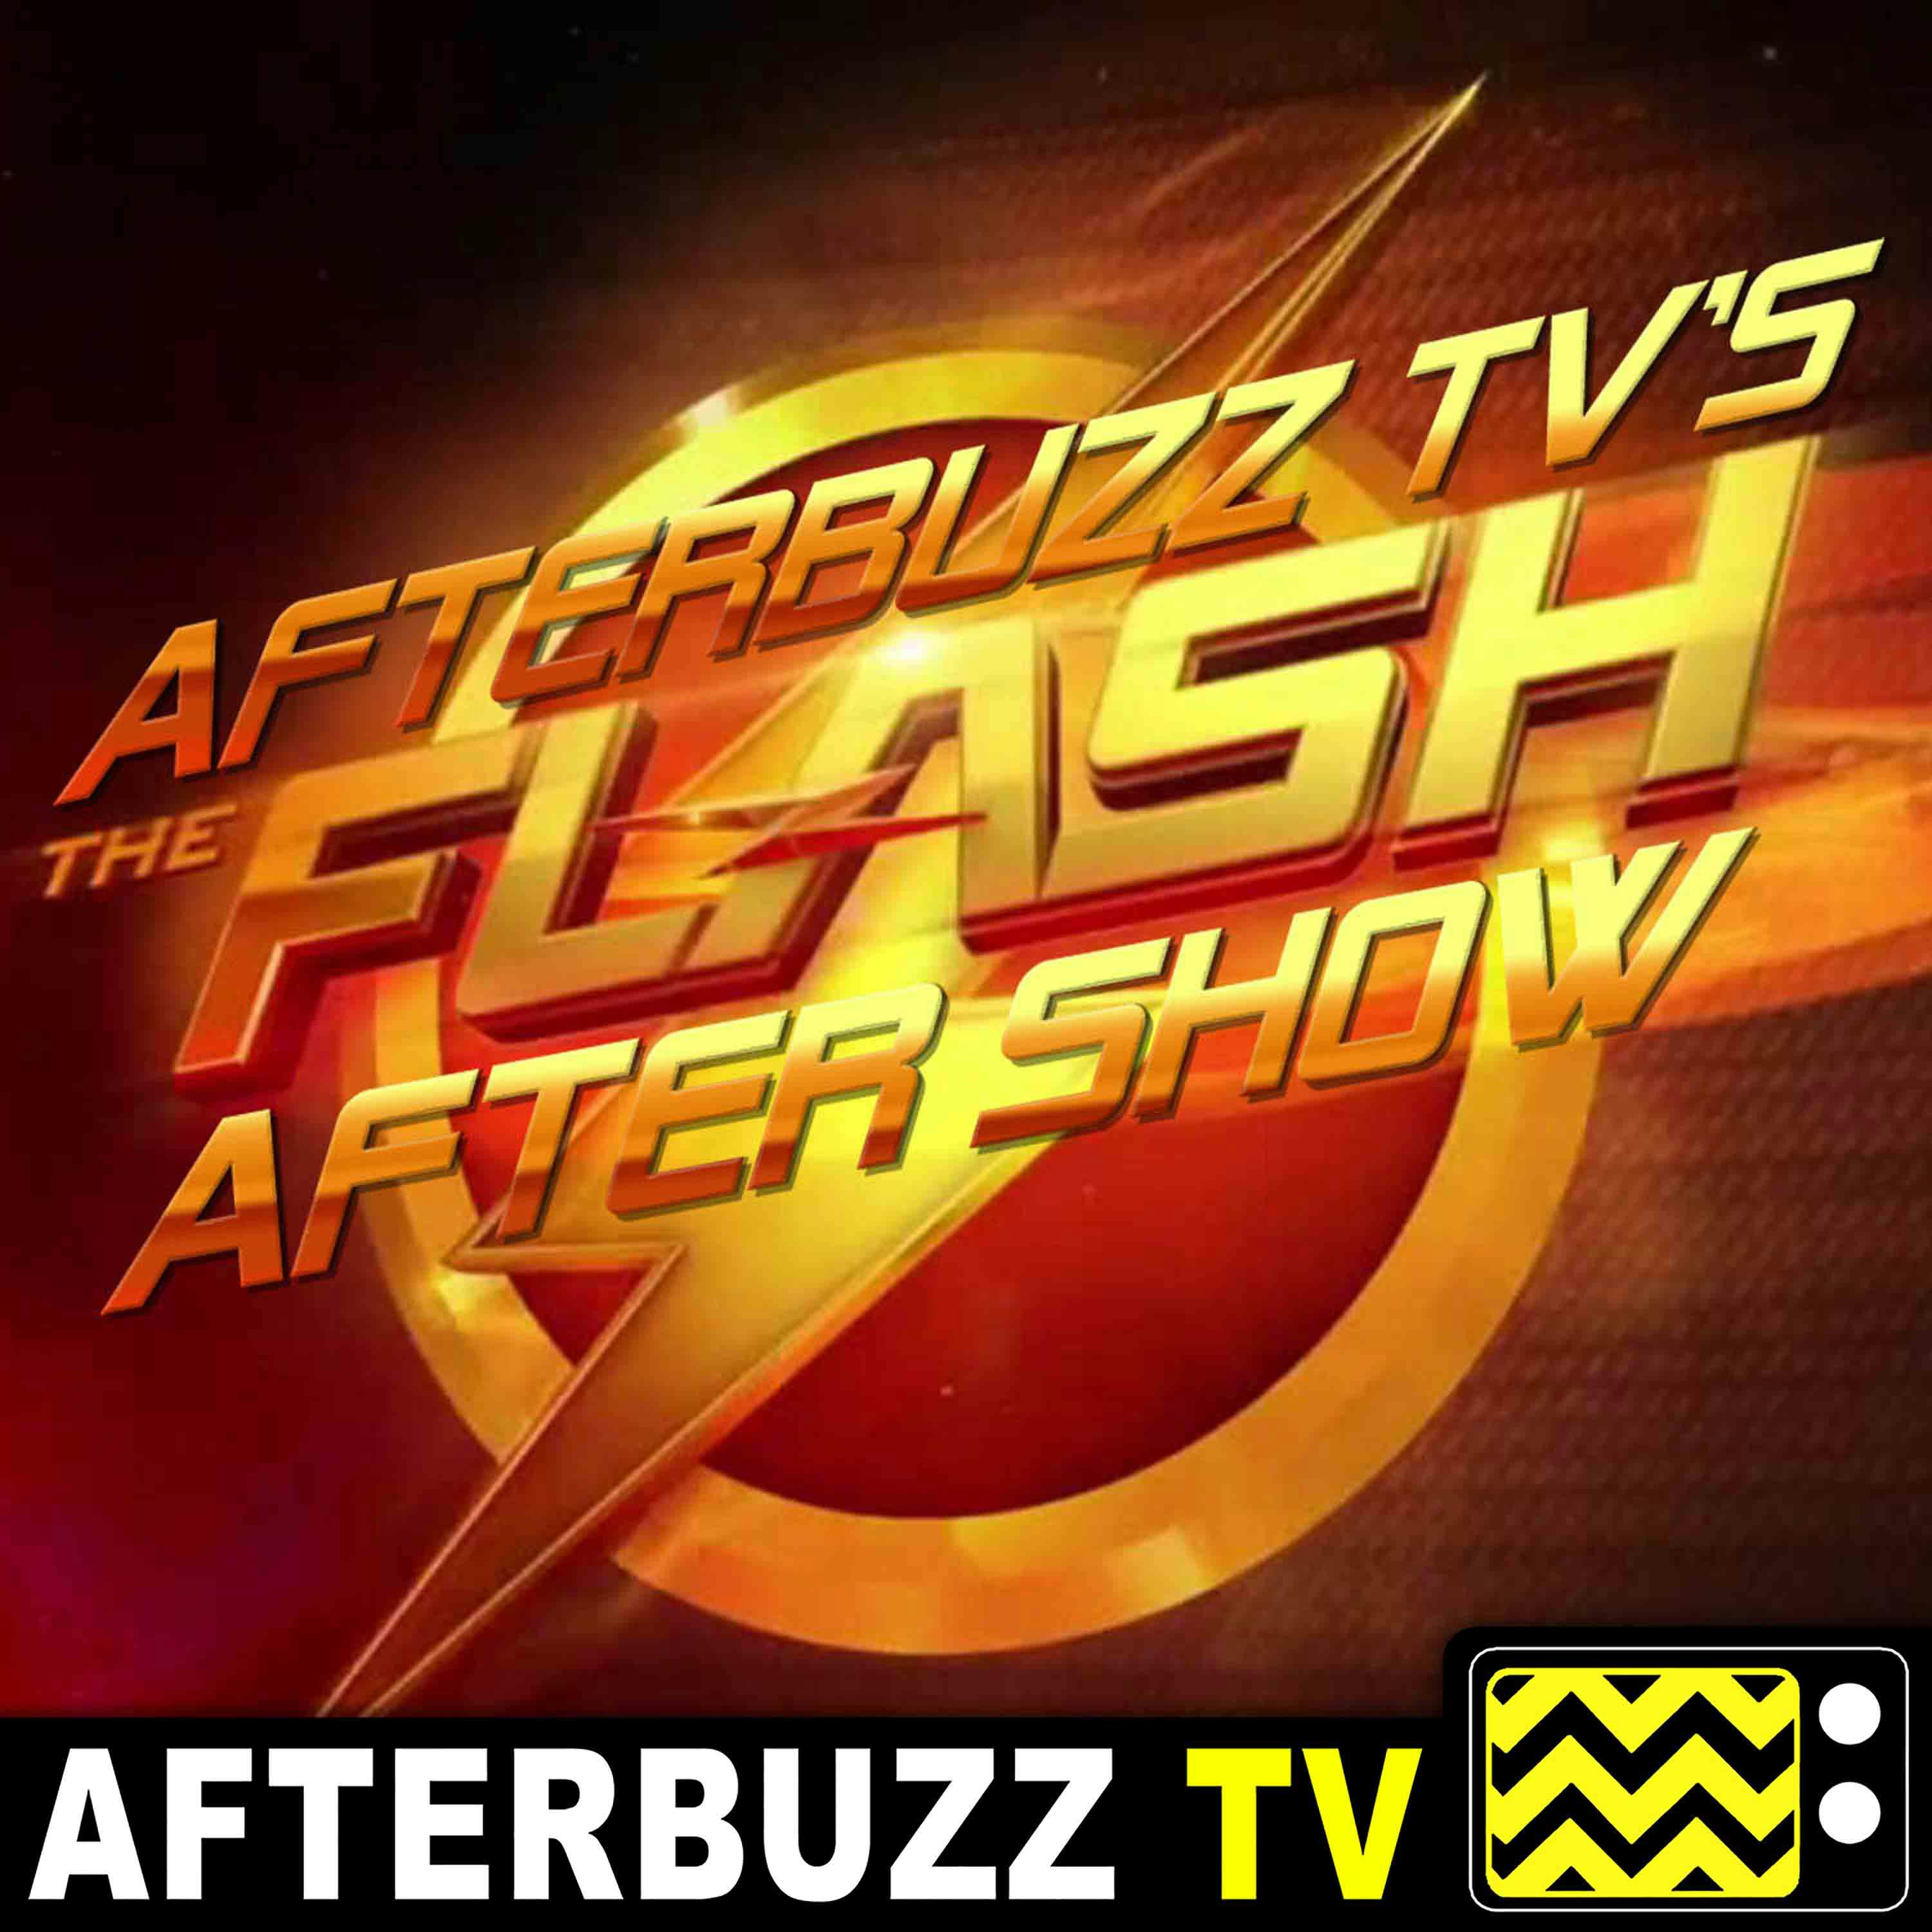 "There Will Be Blood" Season 6 Episode 4 'The Flash' Review